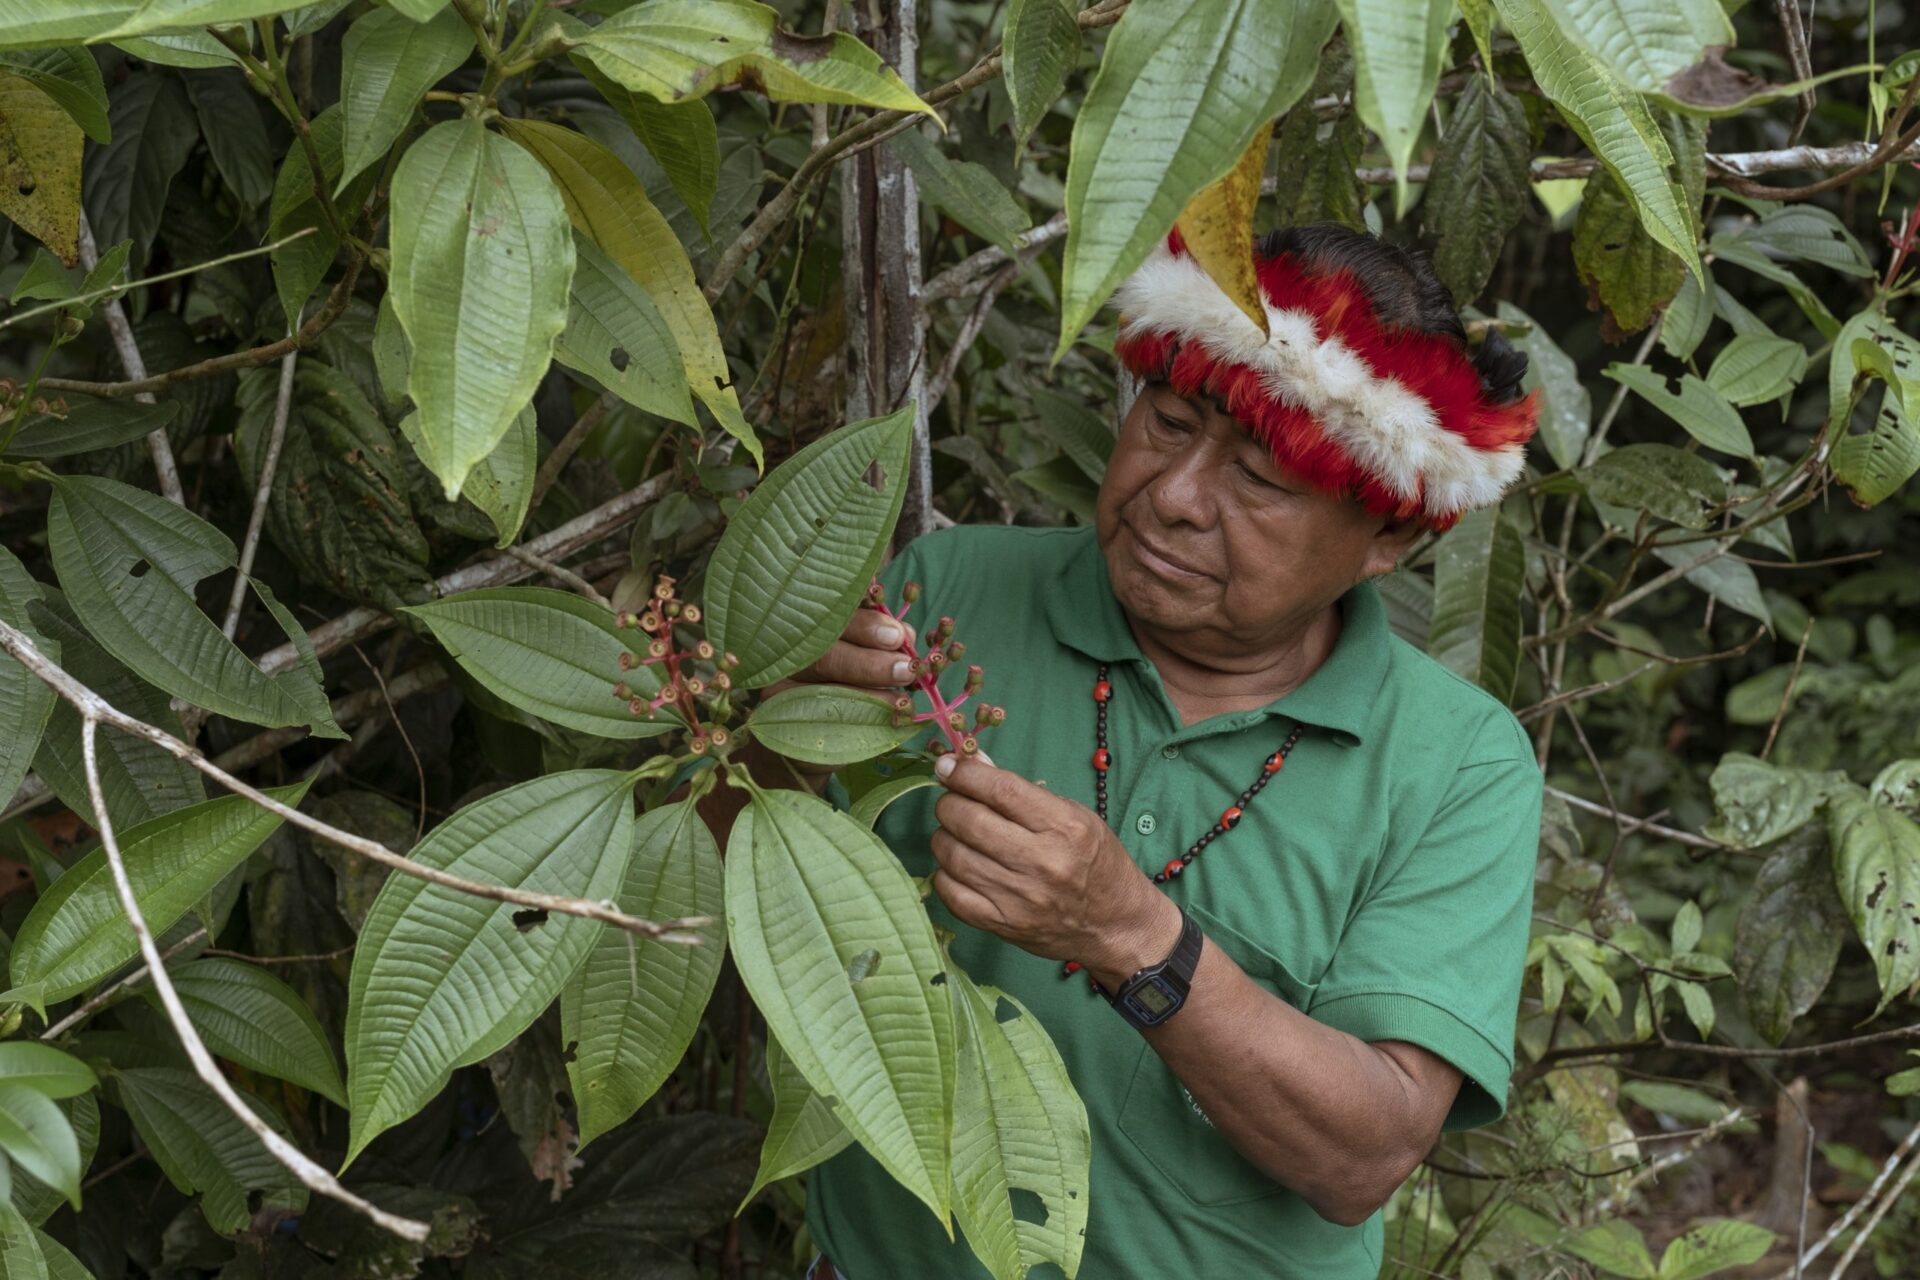 Portrait and detail of Roberto Gonzales, a traditional Wampis healer and member of GTANW. Roberto holds and observes the Yankun flower and fruit, a staple food for the wild birds of the forest.